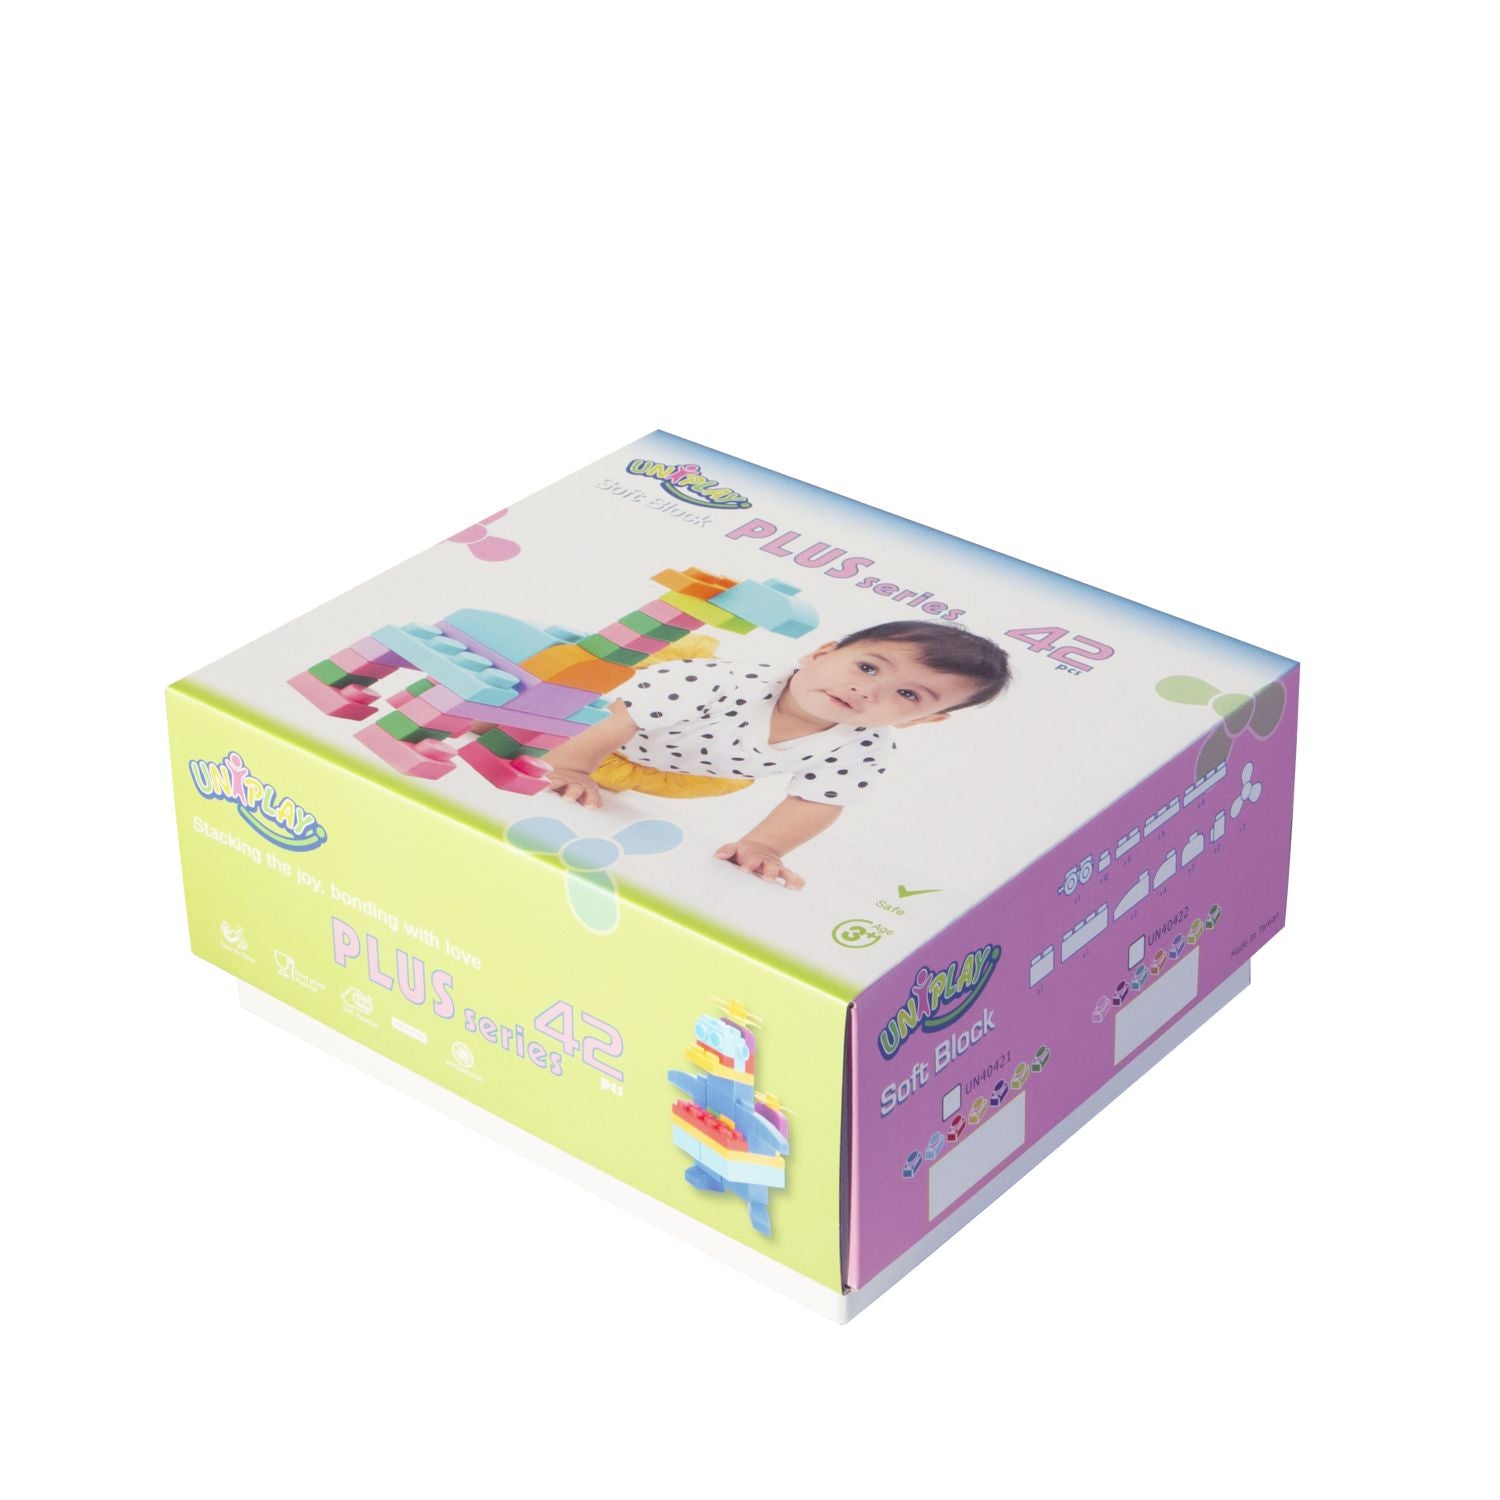 12 Primary-Colored Toddler Baby Blocks